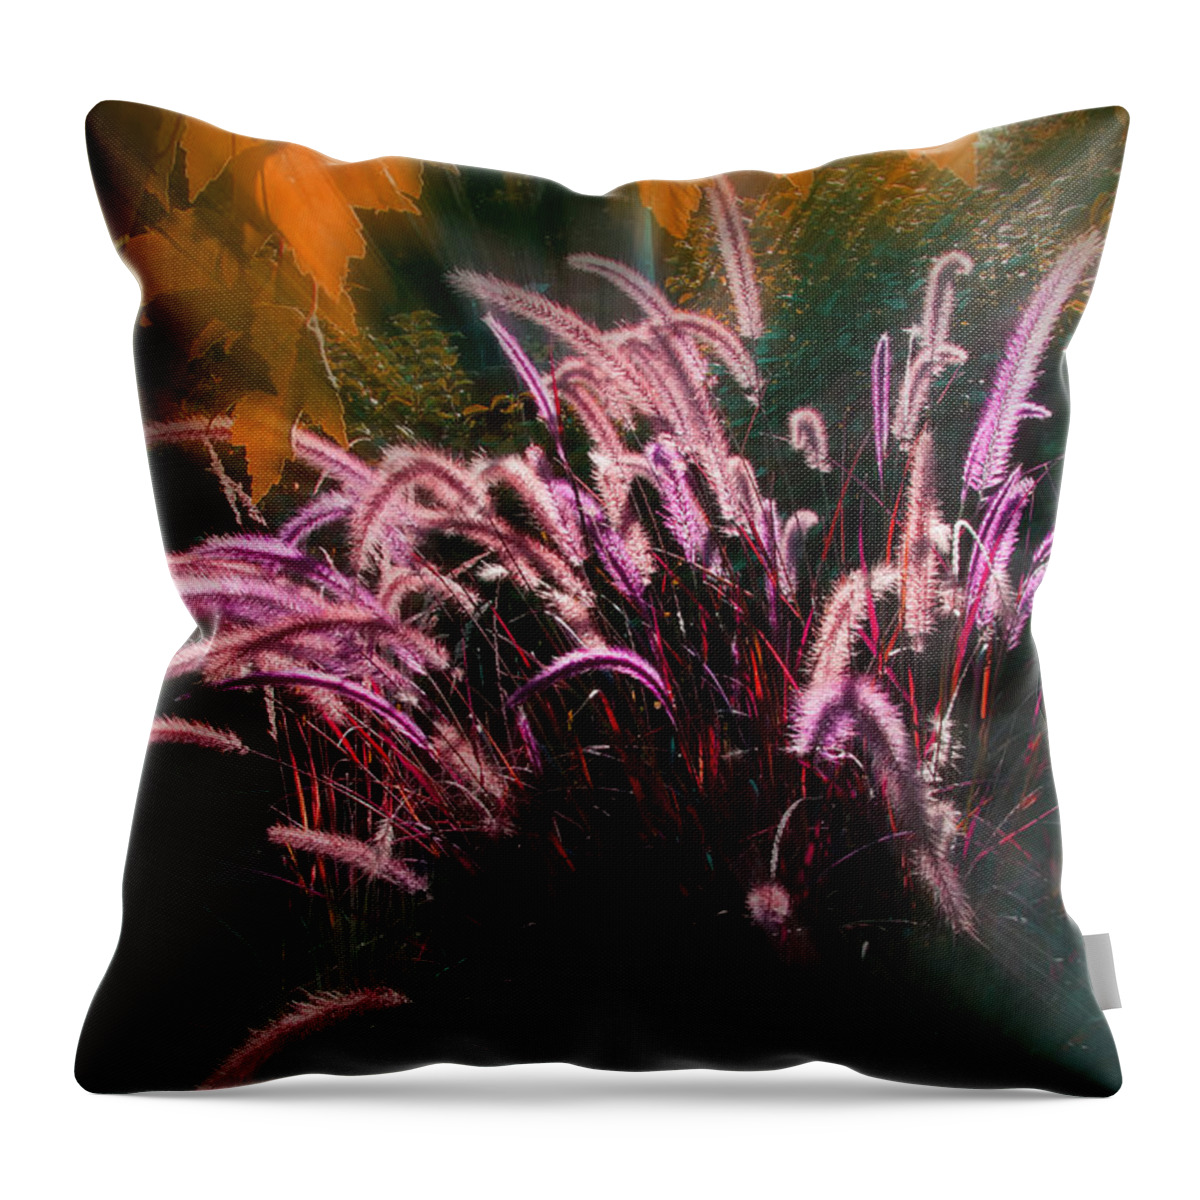 Purple Throw Pillow featuring the photograph Purple Fountain Grass Fantasy by Mick Anderson